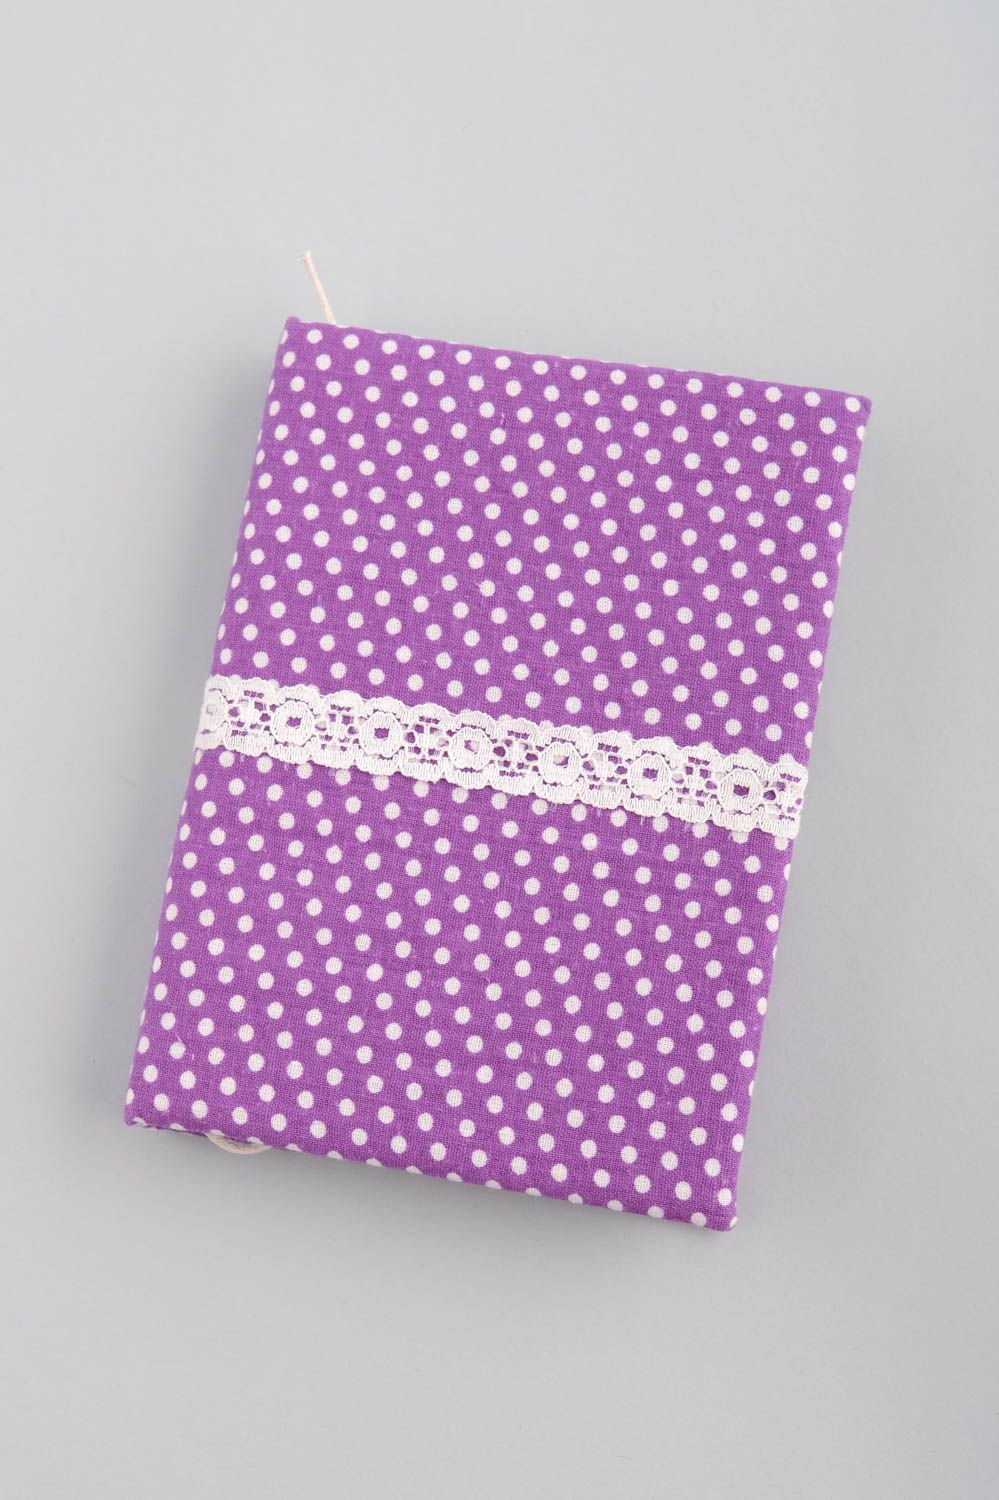 Handmade designer notebook with bright violet polka dot fabric cover with lace photo 2